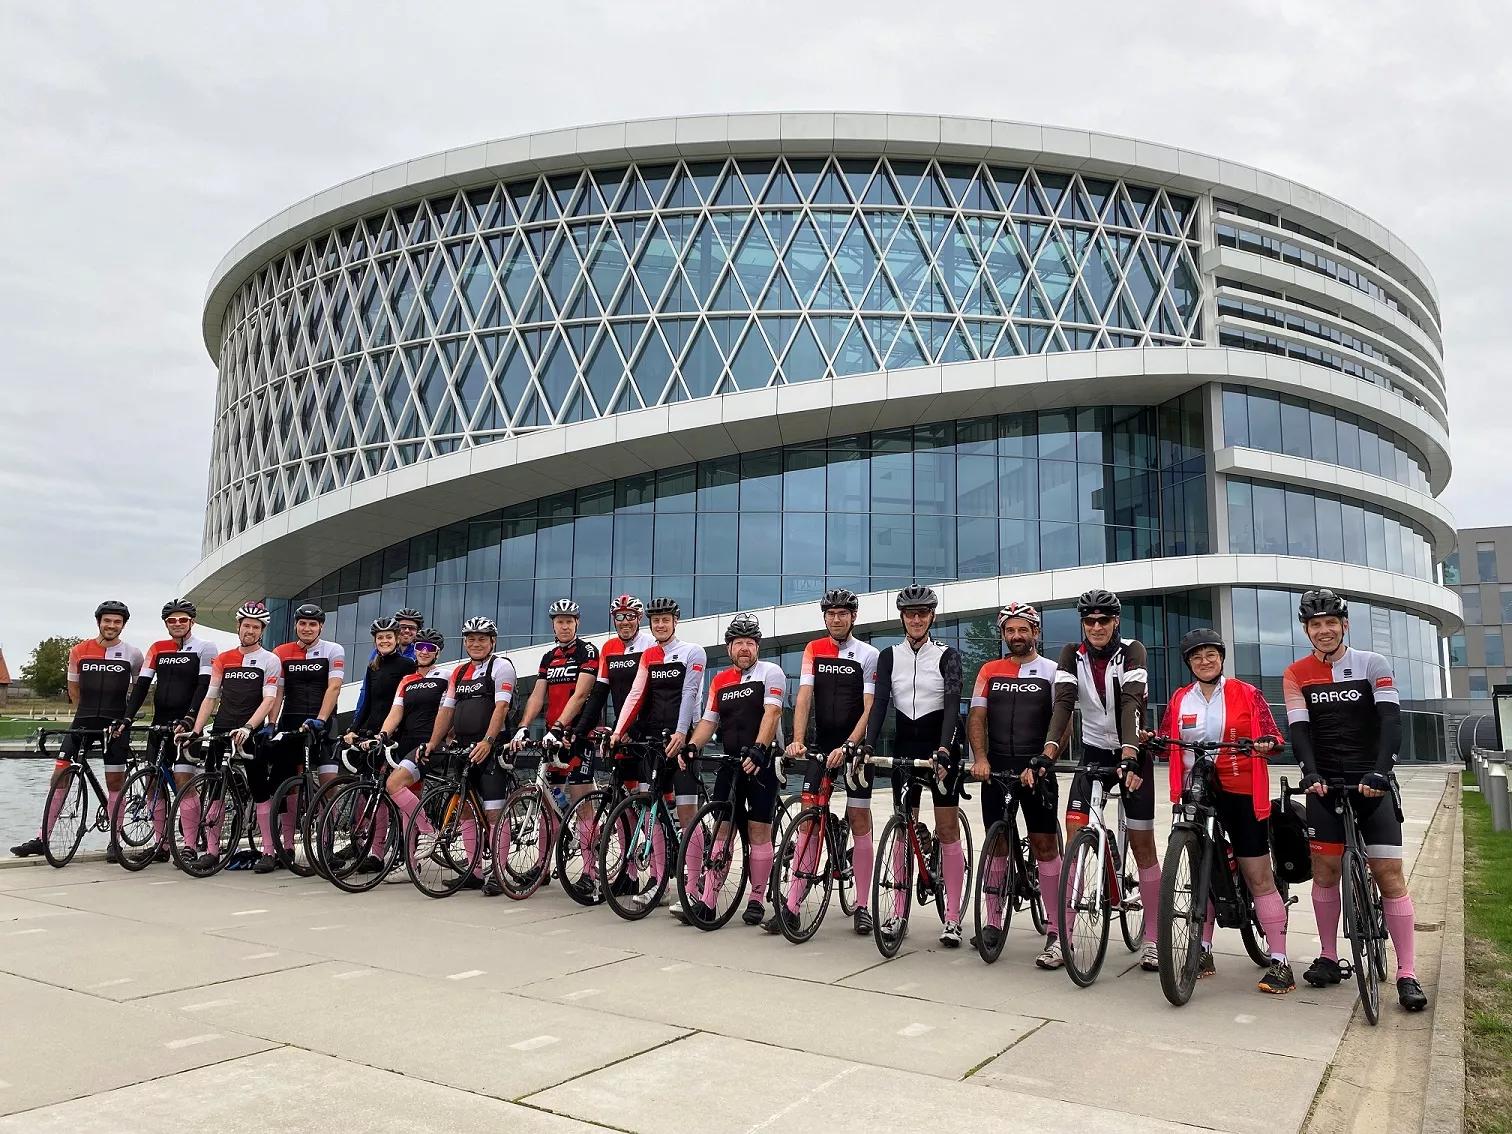 The Barco cycling team starting their Pink Bike Ride for Breast Cancer Awareness Month